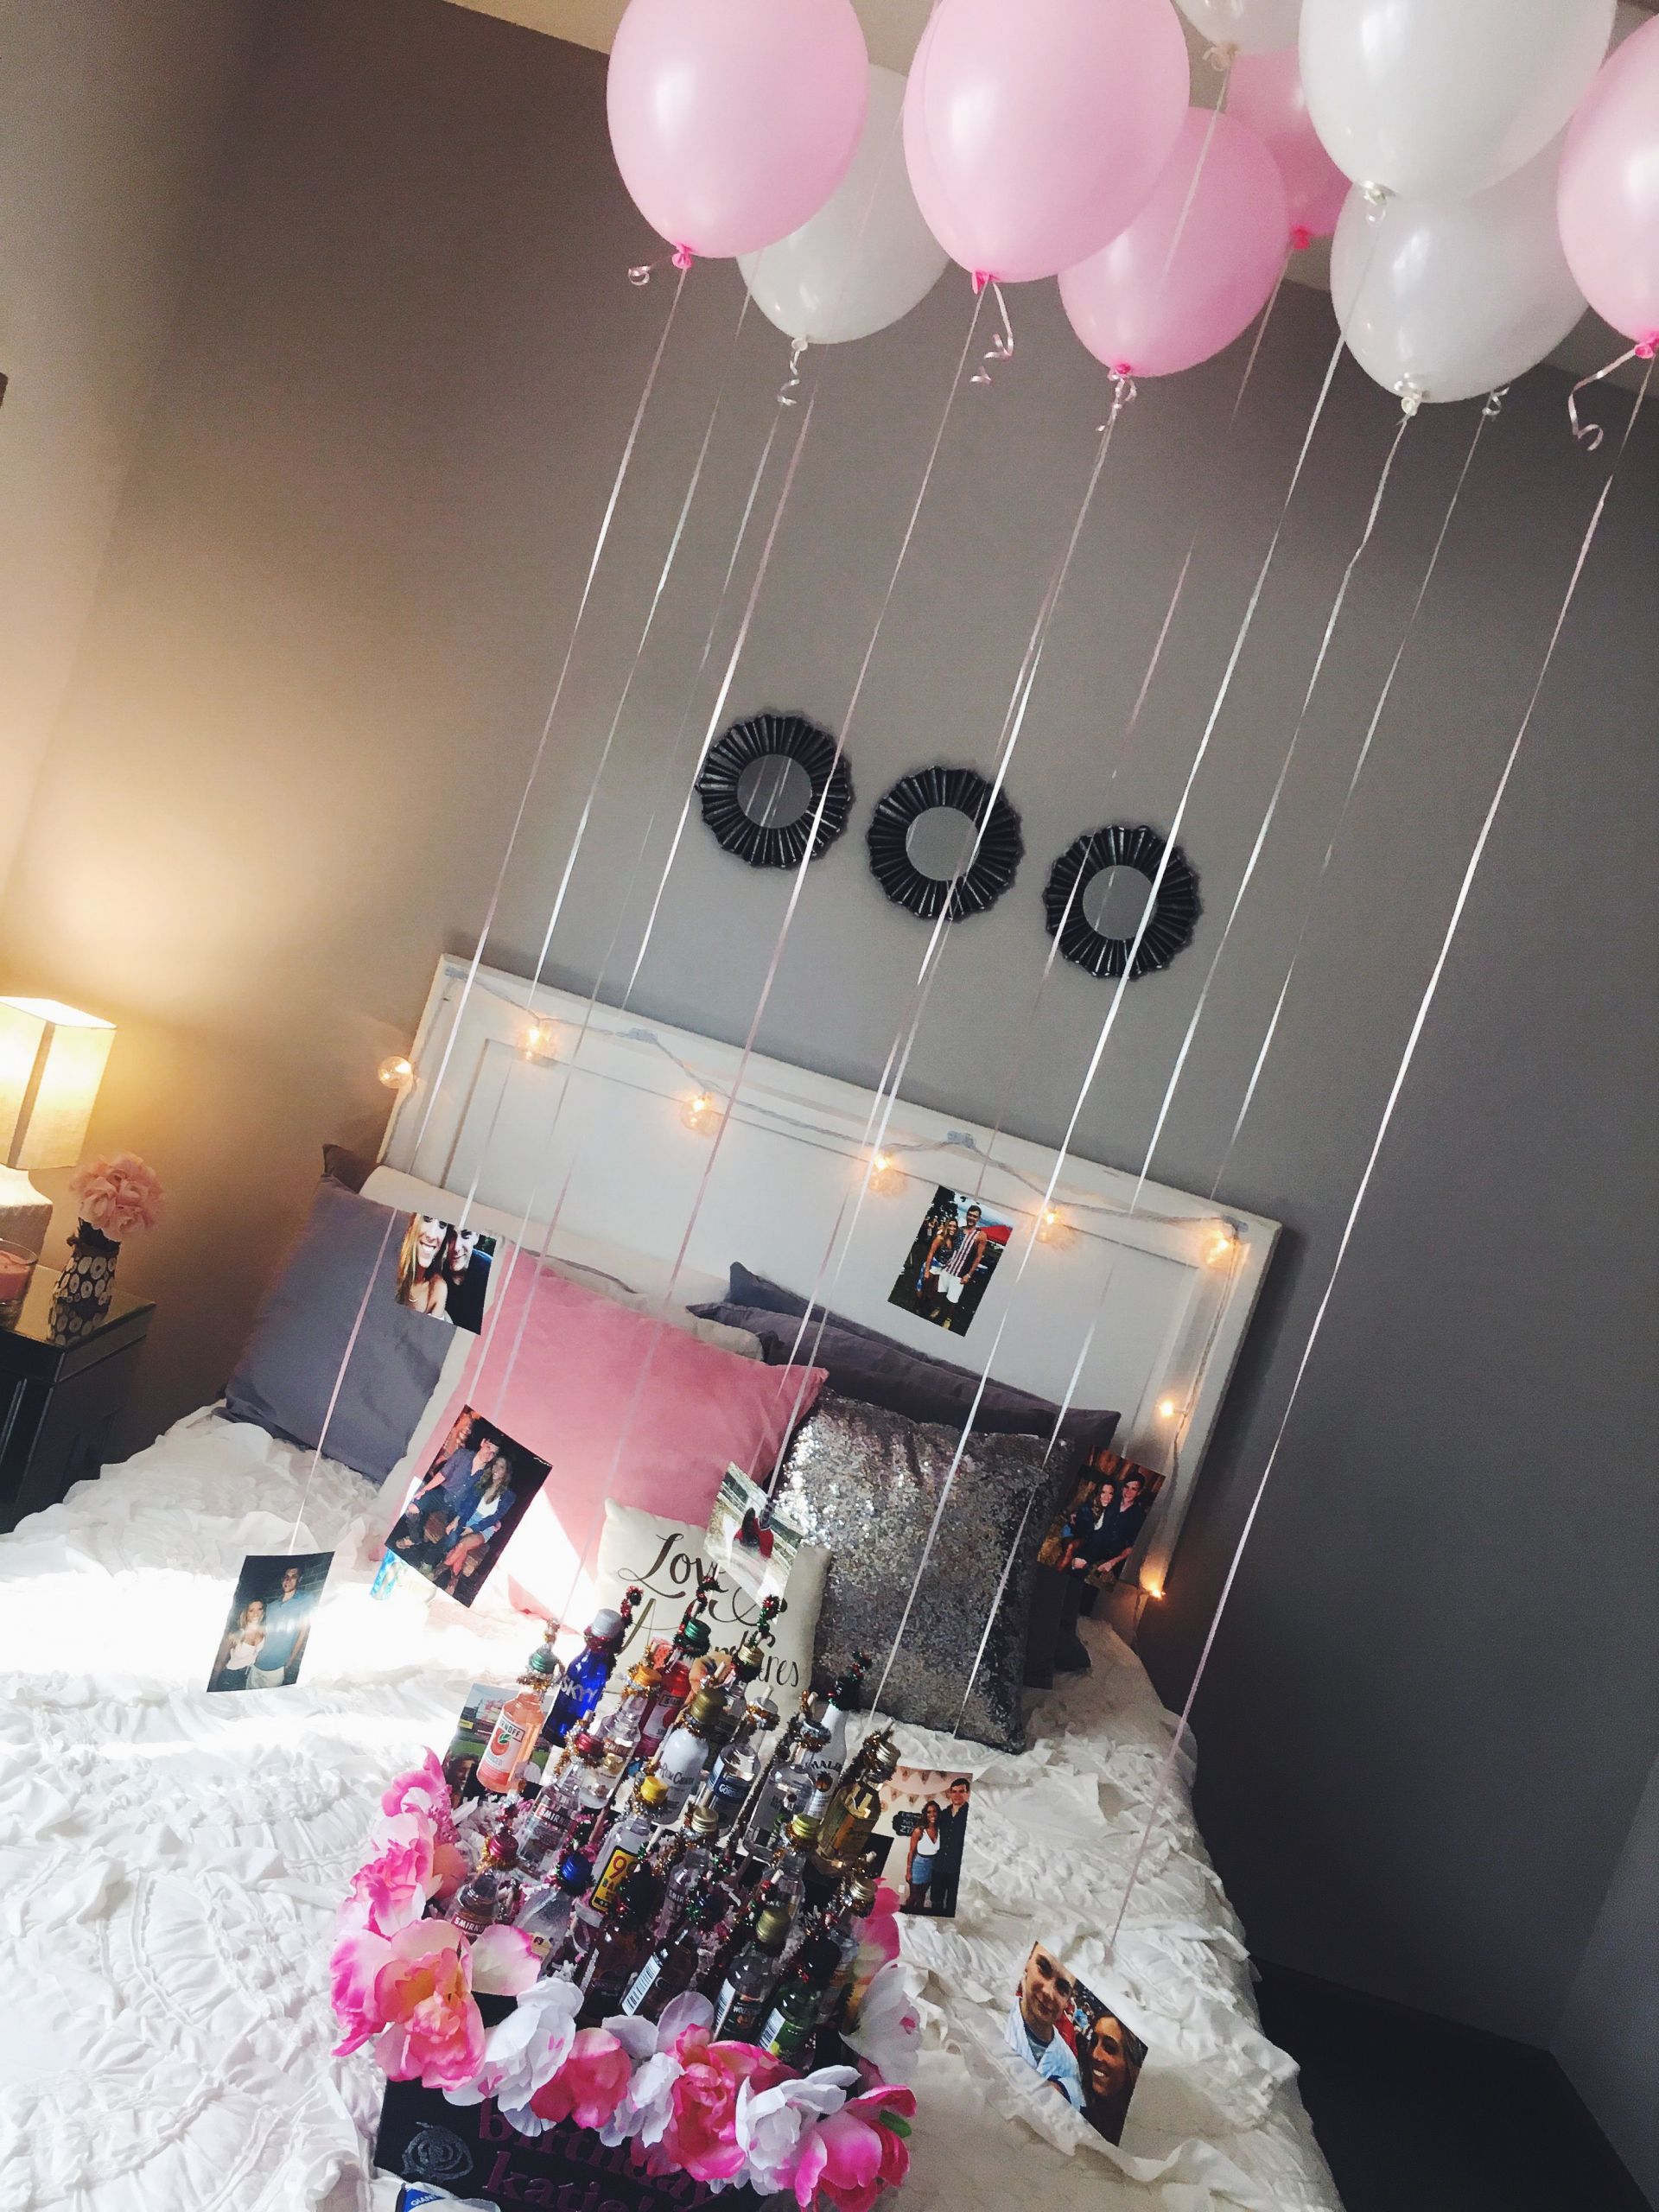 Gift Ideas For Girlfriend 21St Birthday
 easy and cute decorations for a friend or girlfriends 21st